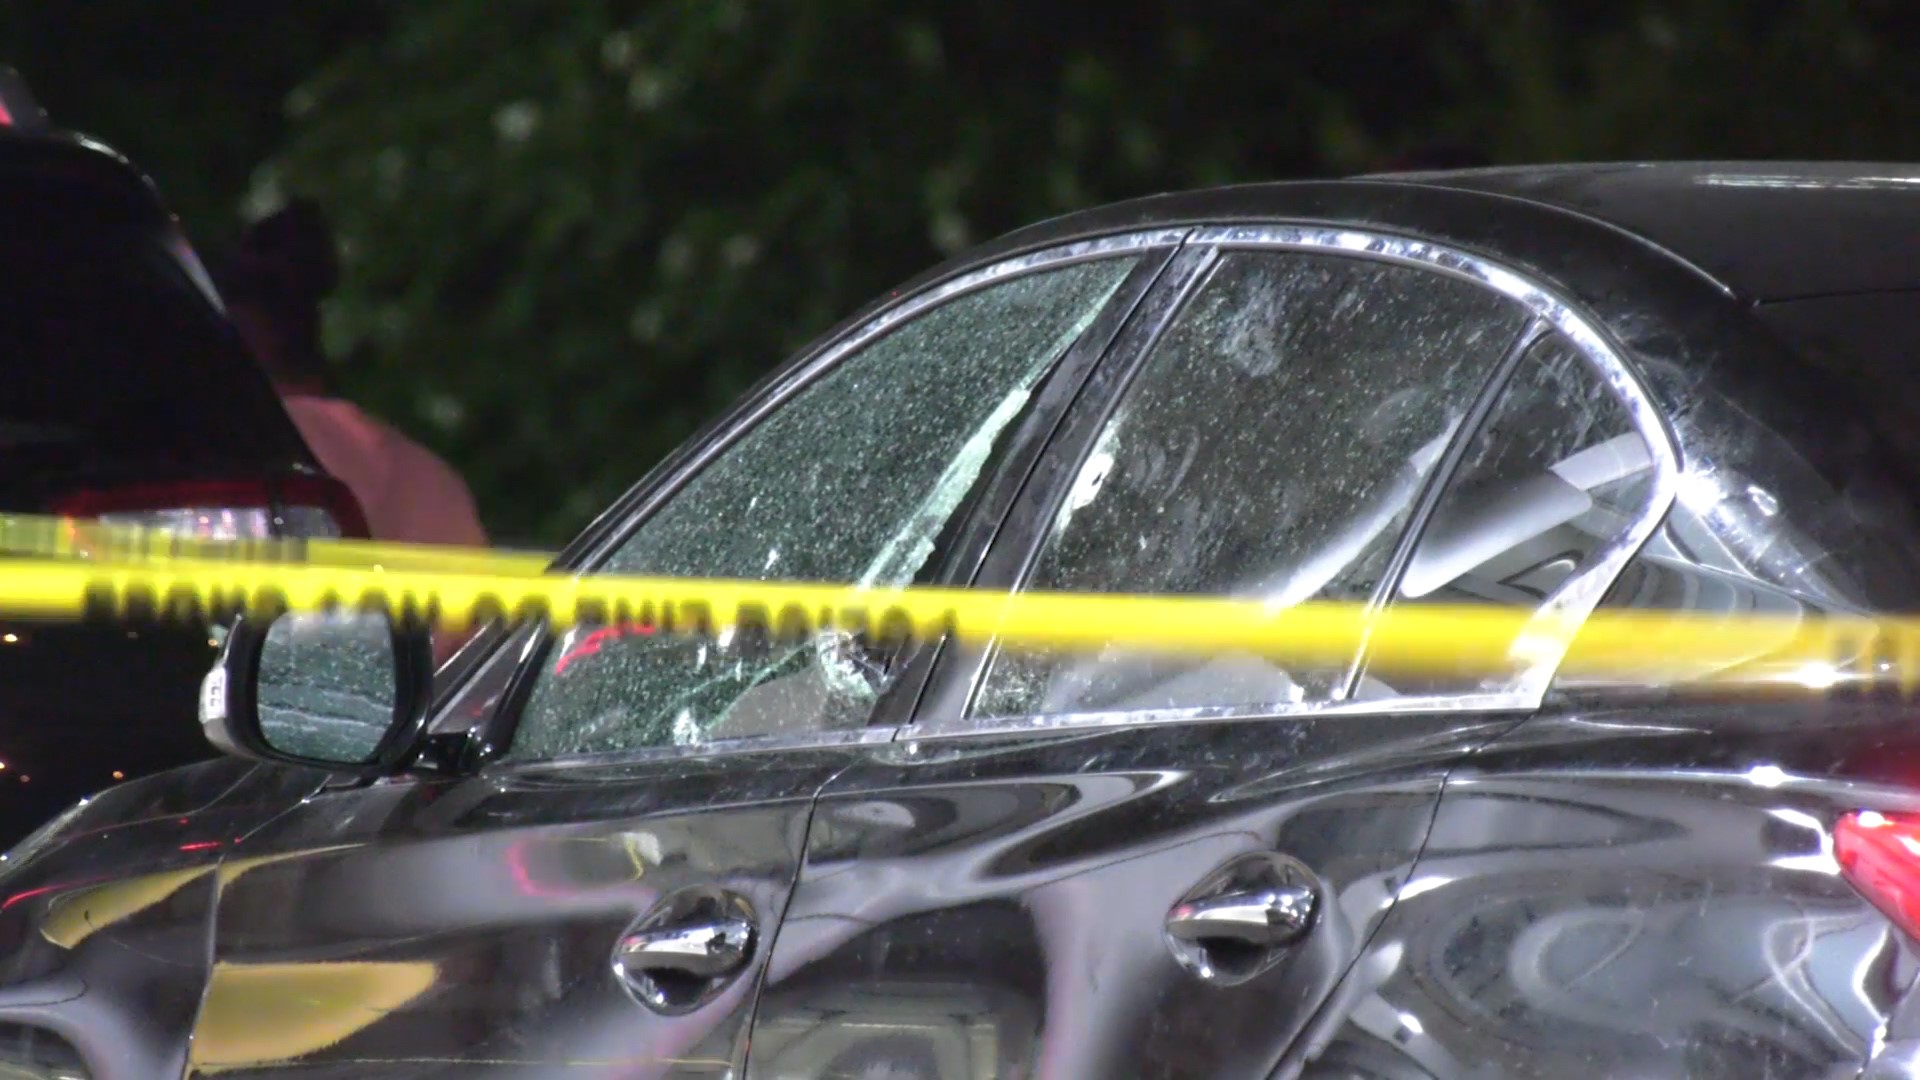 Three victims were taken to the hospital in a shot-up vehicle. The shooting was reported along 288 at Holcombe.